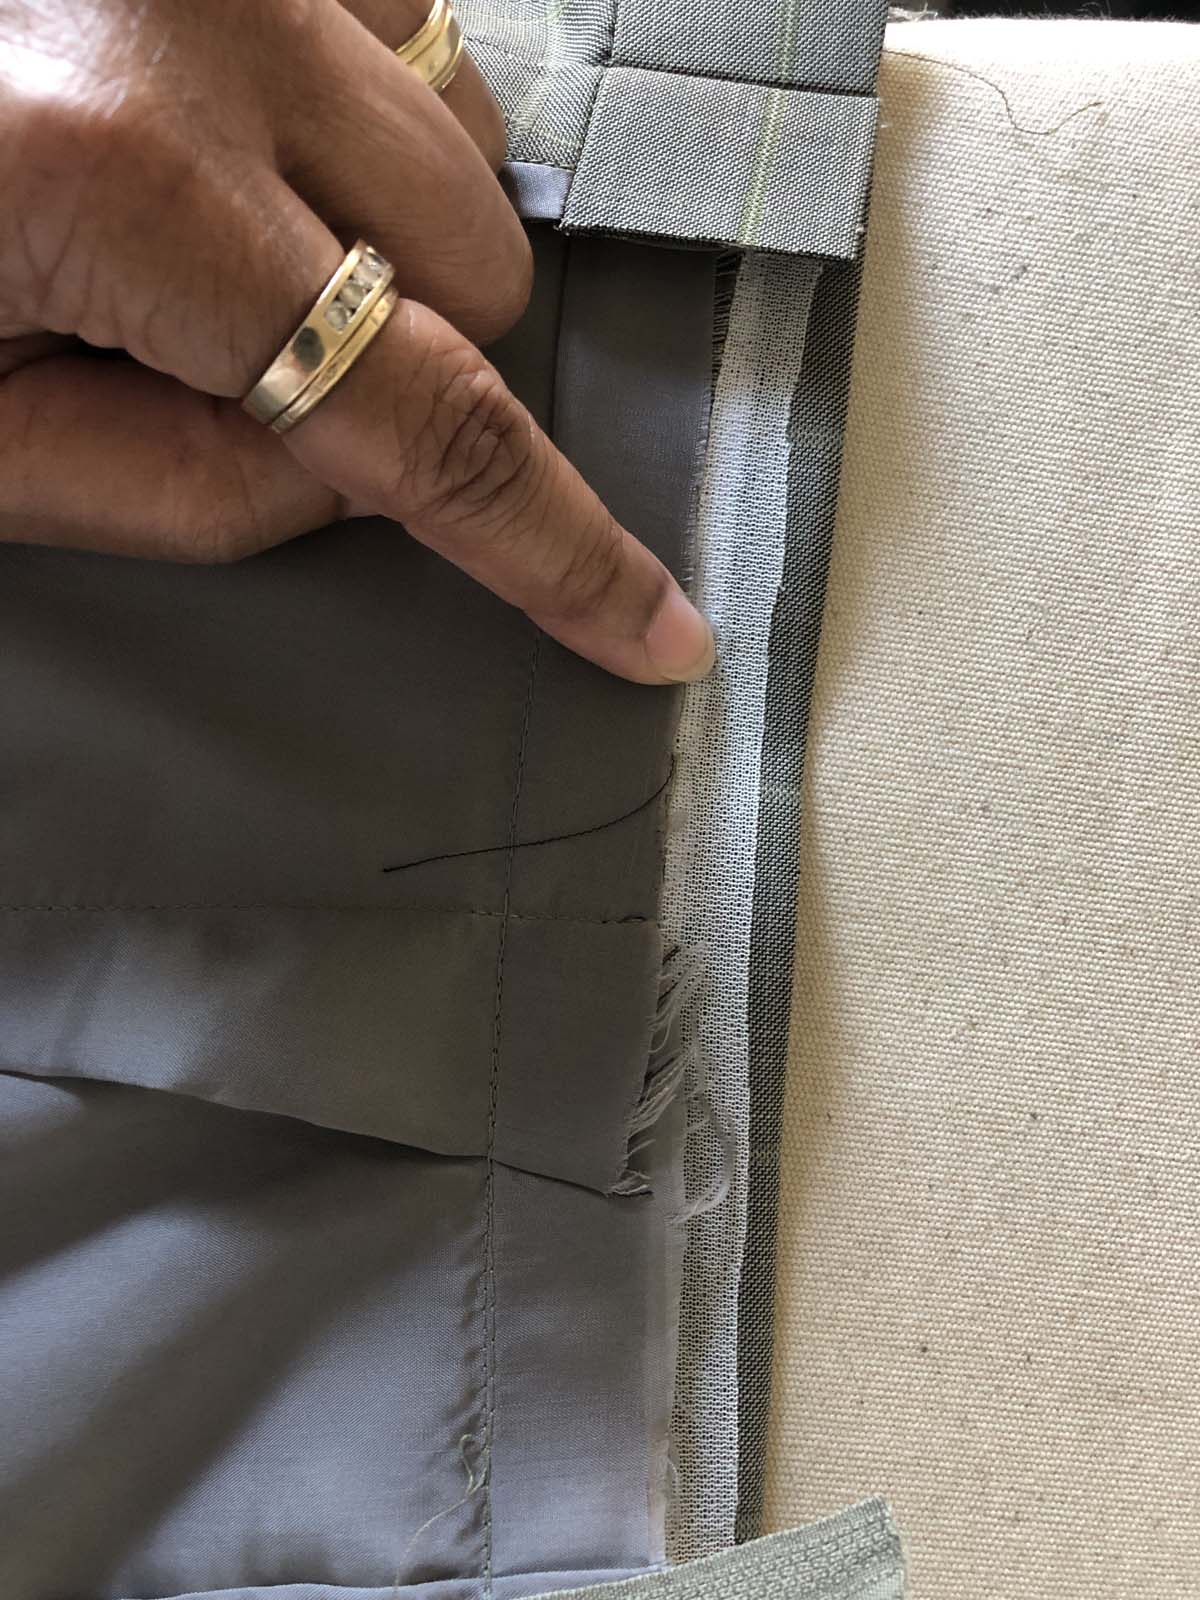 Fusible stay tape holds the raw edge in place